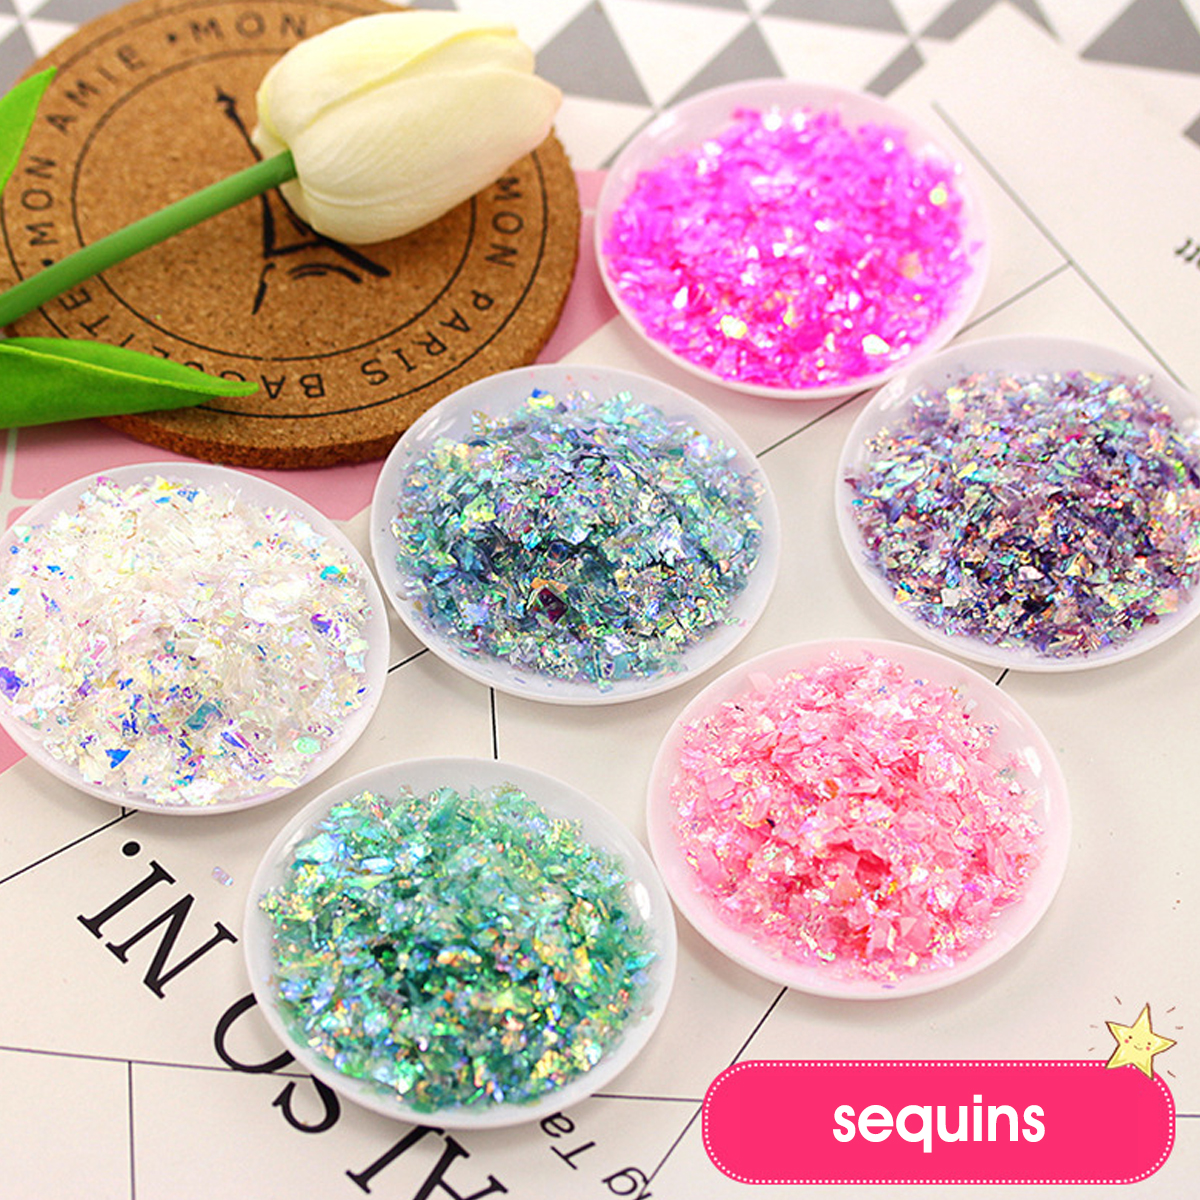 285Pcs-Resin-Casting-Molds-Kit-Silicone-Making-Jewelry-DIY-Pendant-Craft-Mould-Tools-Kit-1808480-10